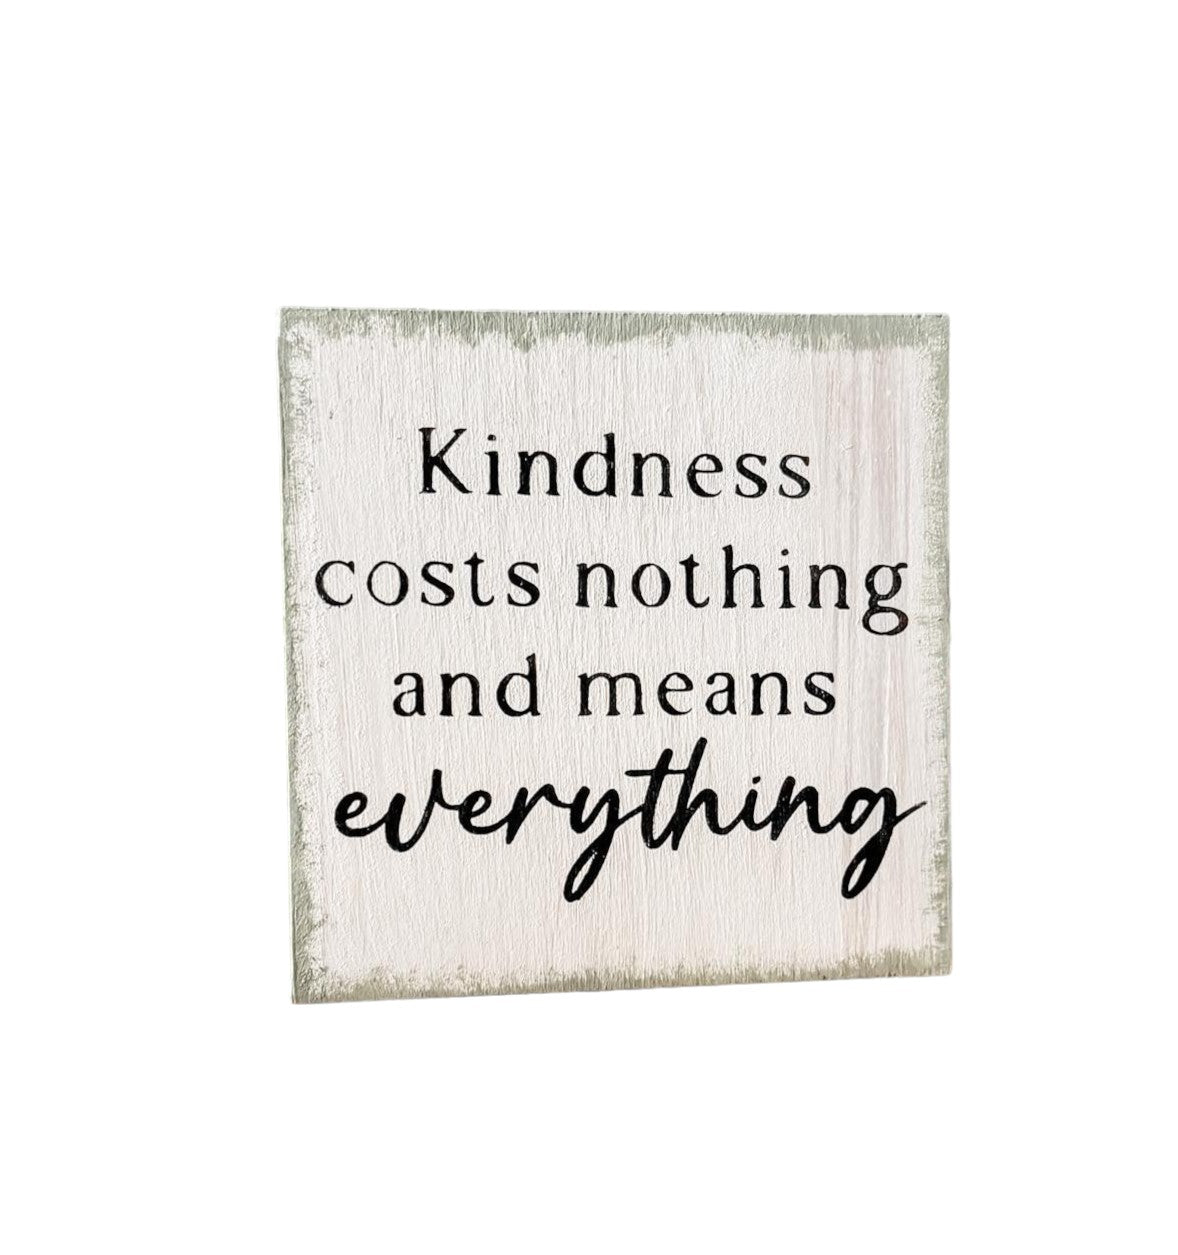 Kindness Costs Nothing and Means Everything" Wood Sign: Hand-painted black text on white background with sage green border, 4.5" x 4.5". Inspirational decor for any room.